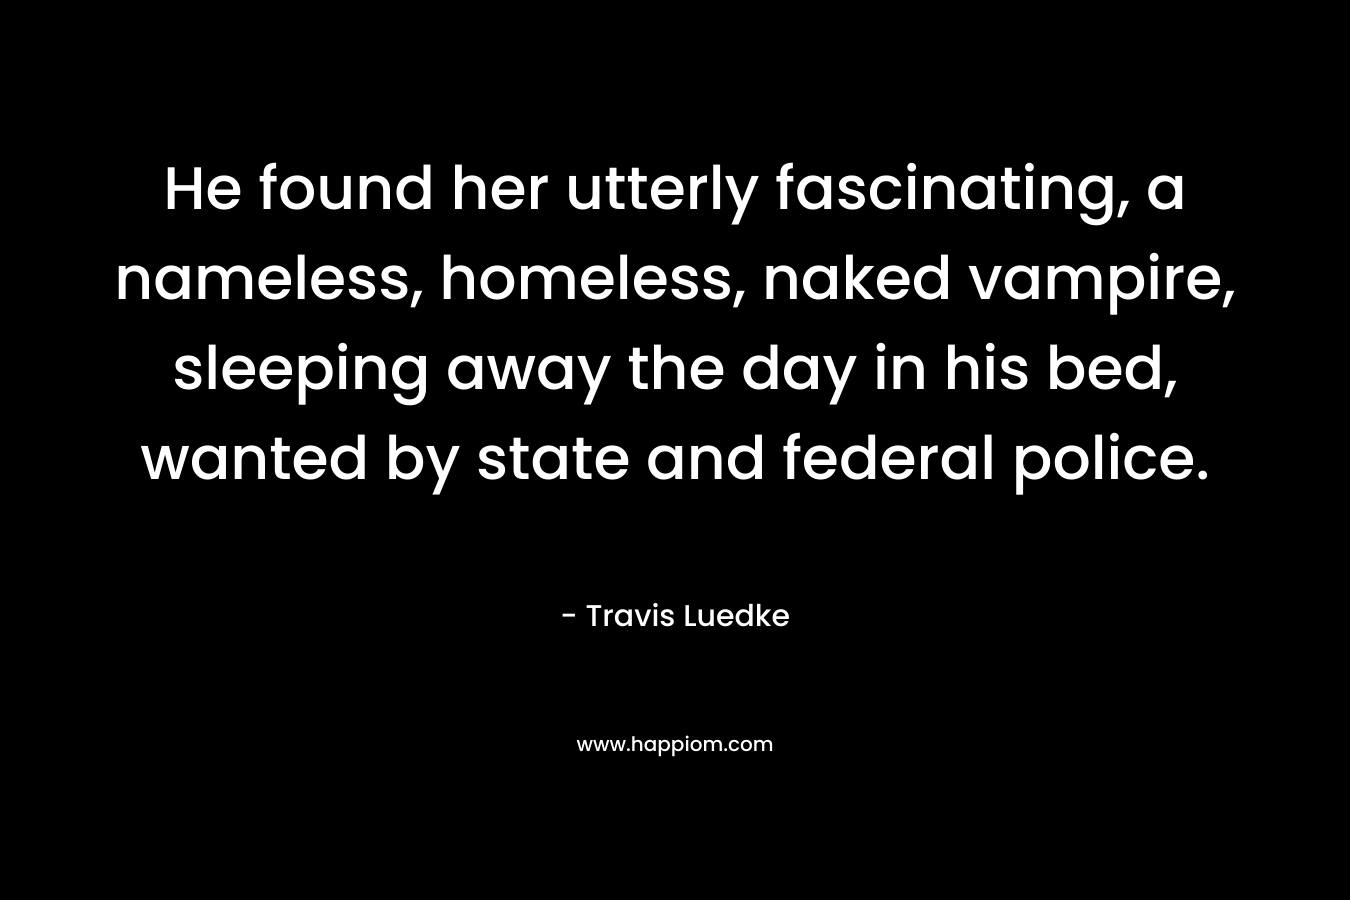 He found her utterly fascinating, a nameless, homeless, naked vampire, sleeping away the day in his bed, wanted by state and federal police.